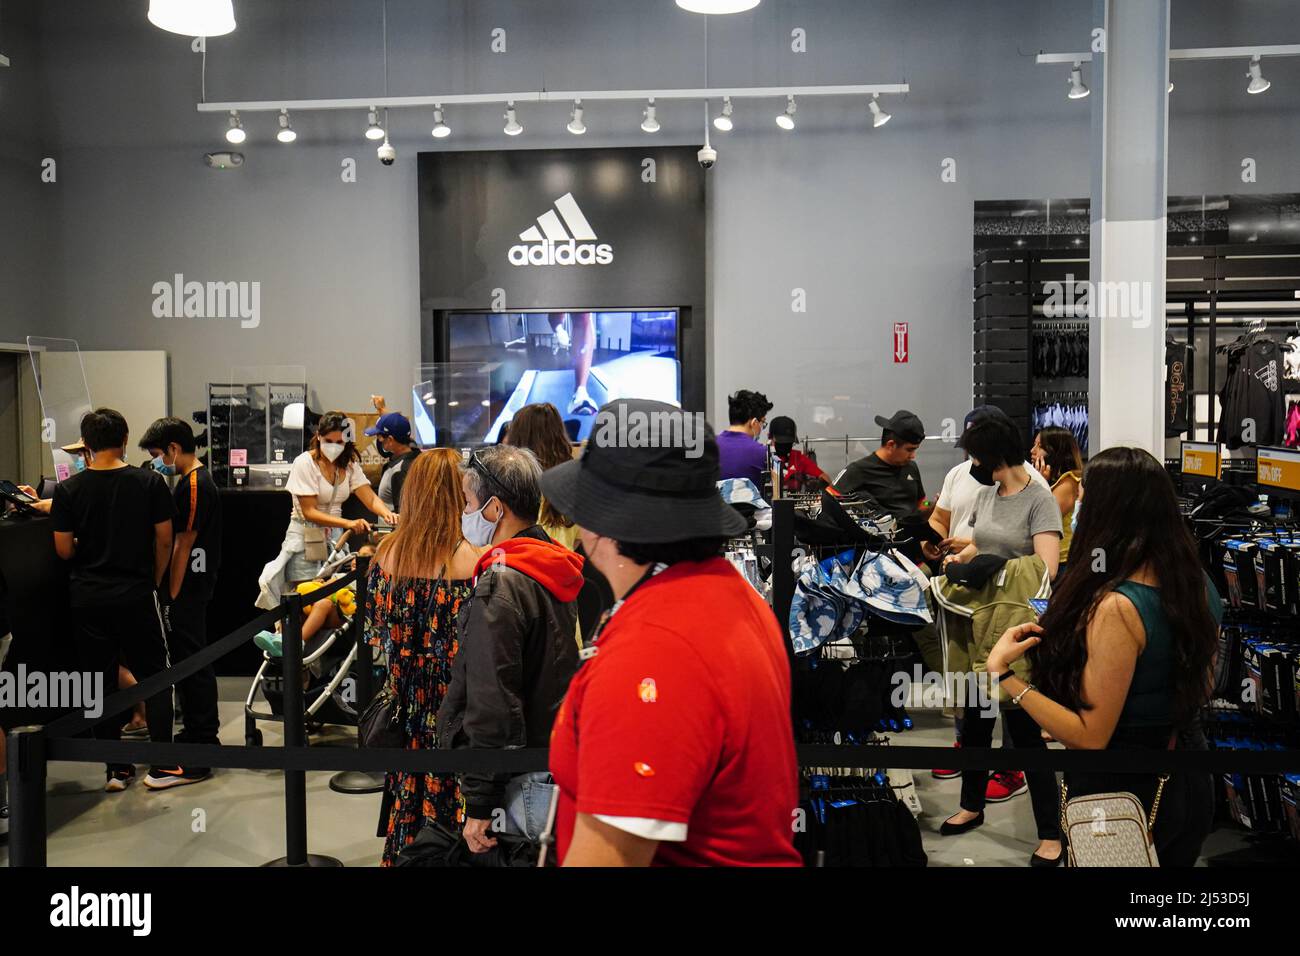 People seen inside an Adidas store at The Outlets in Orange. Many people shop at The Outlets in Orange, for shoes, and backpacks with a discounted price. According